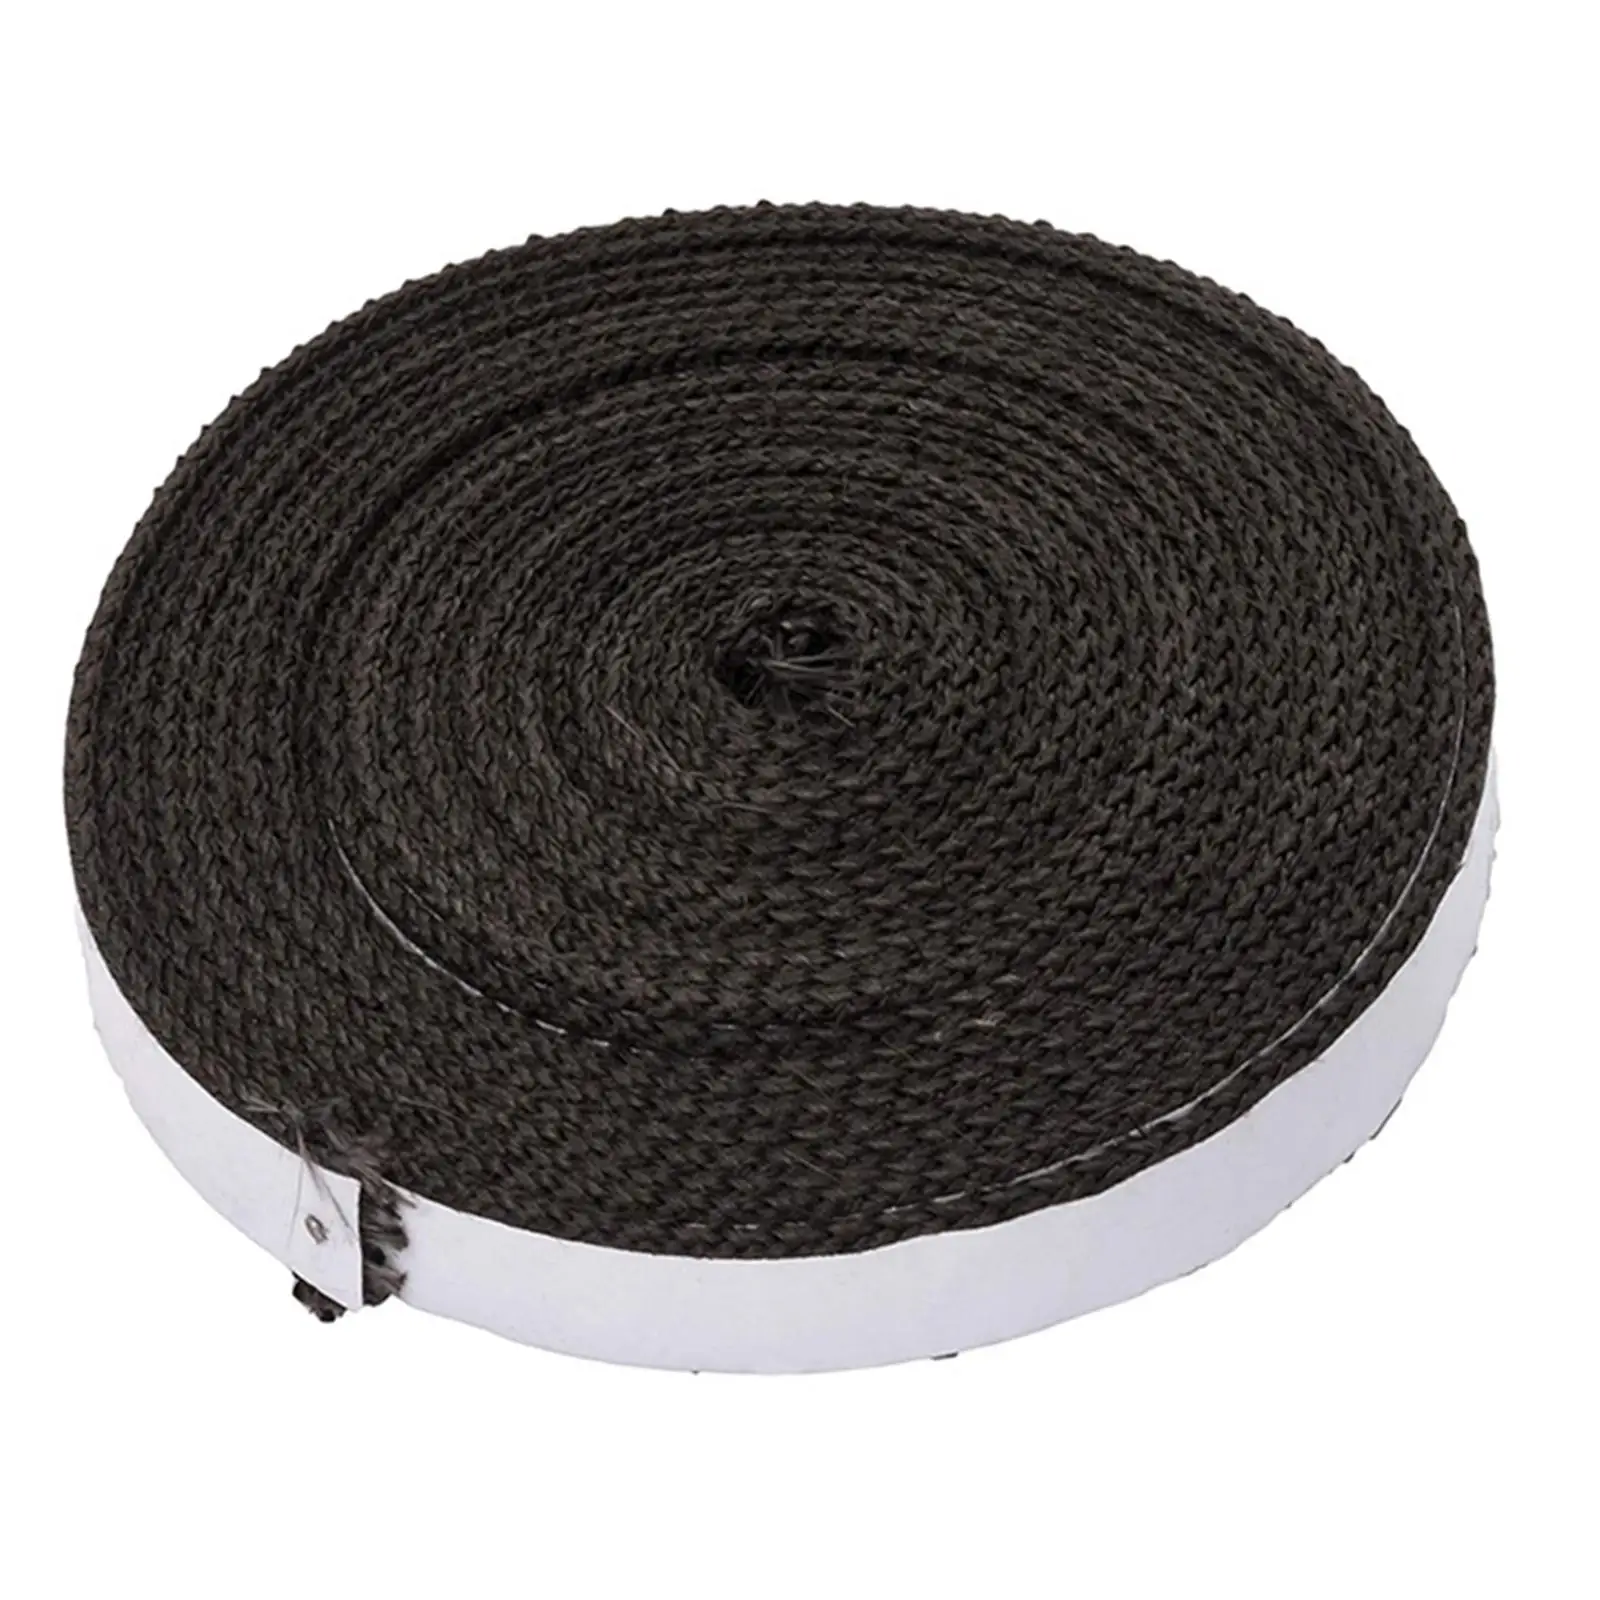 BBQ Gasket High Temperature Resistant Seal Strip 4.5M Sealing Tape Seal Washer for Chimney Lid Outdoor BBQ Accessories